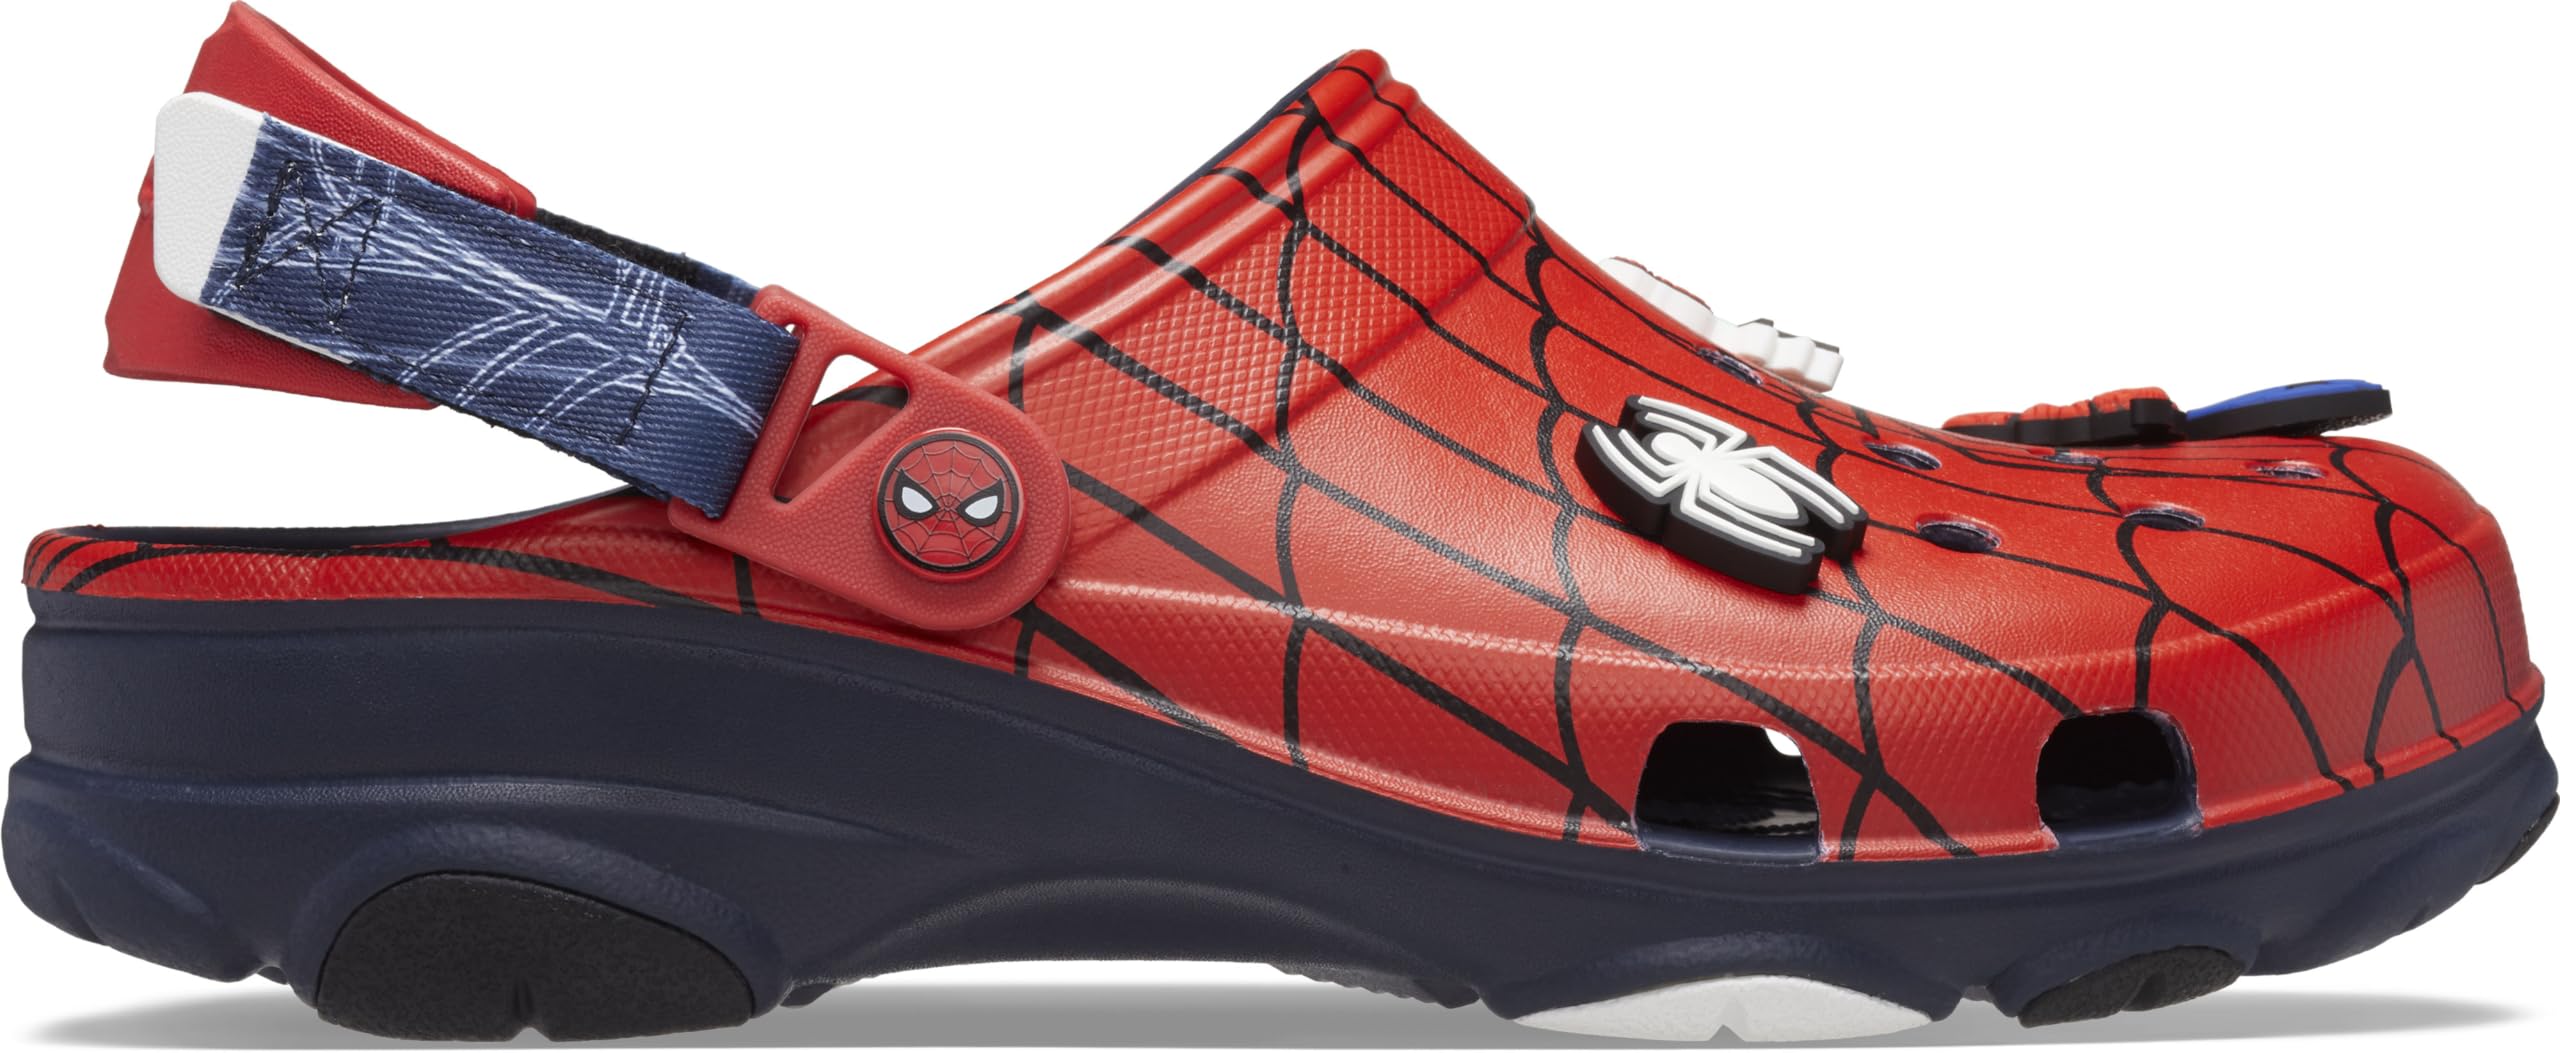 Crocs Unisex-Adult Marvel All Terrain Clogs, Black Panther and Spiderman Shoes